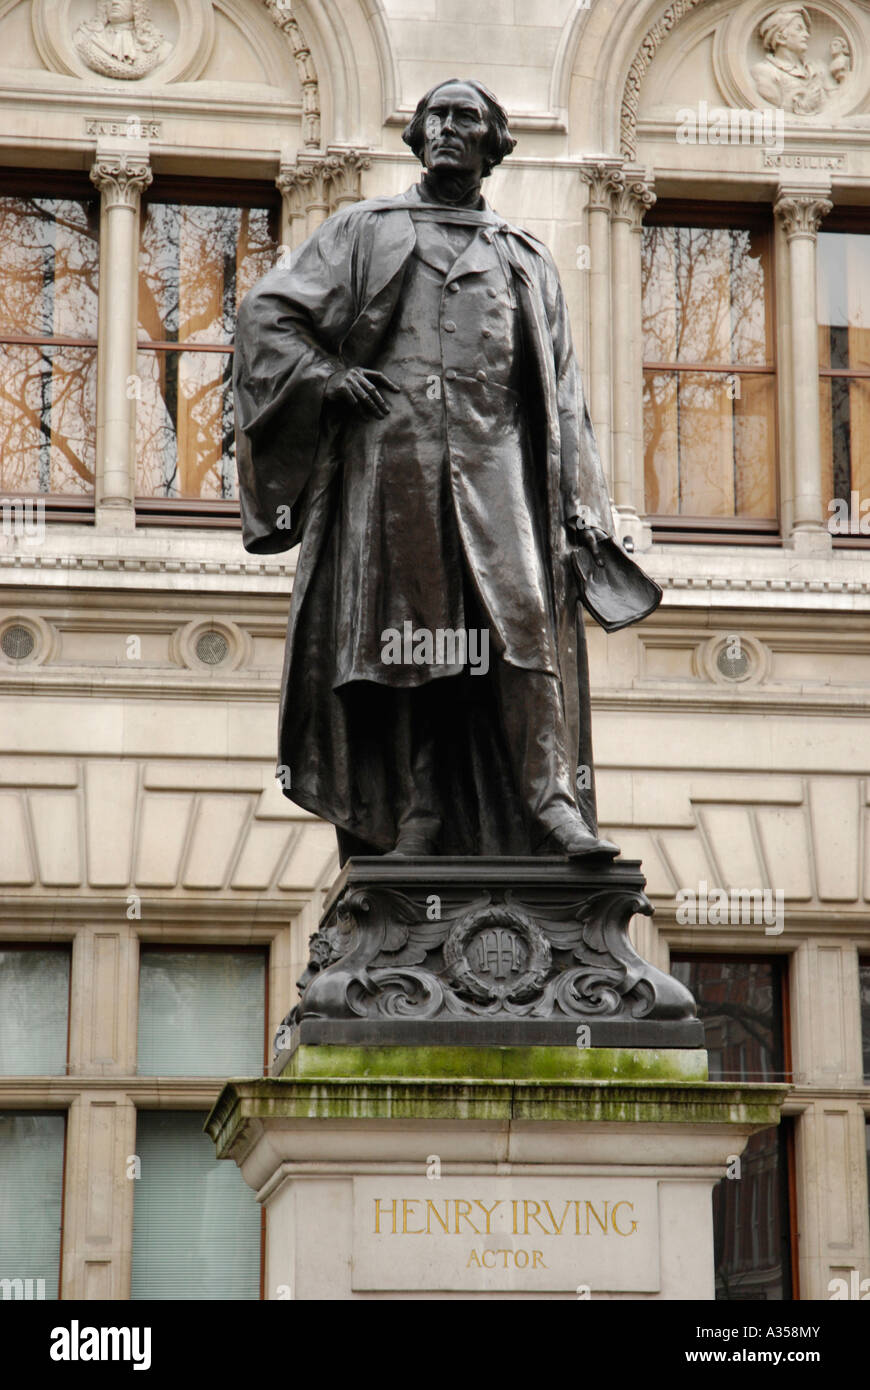 Statue of the famous Victorian actor Henry Irving in front of the National Portrait Gallery London Stock Photo